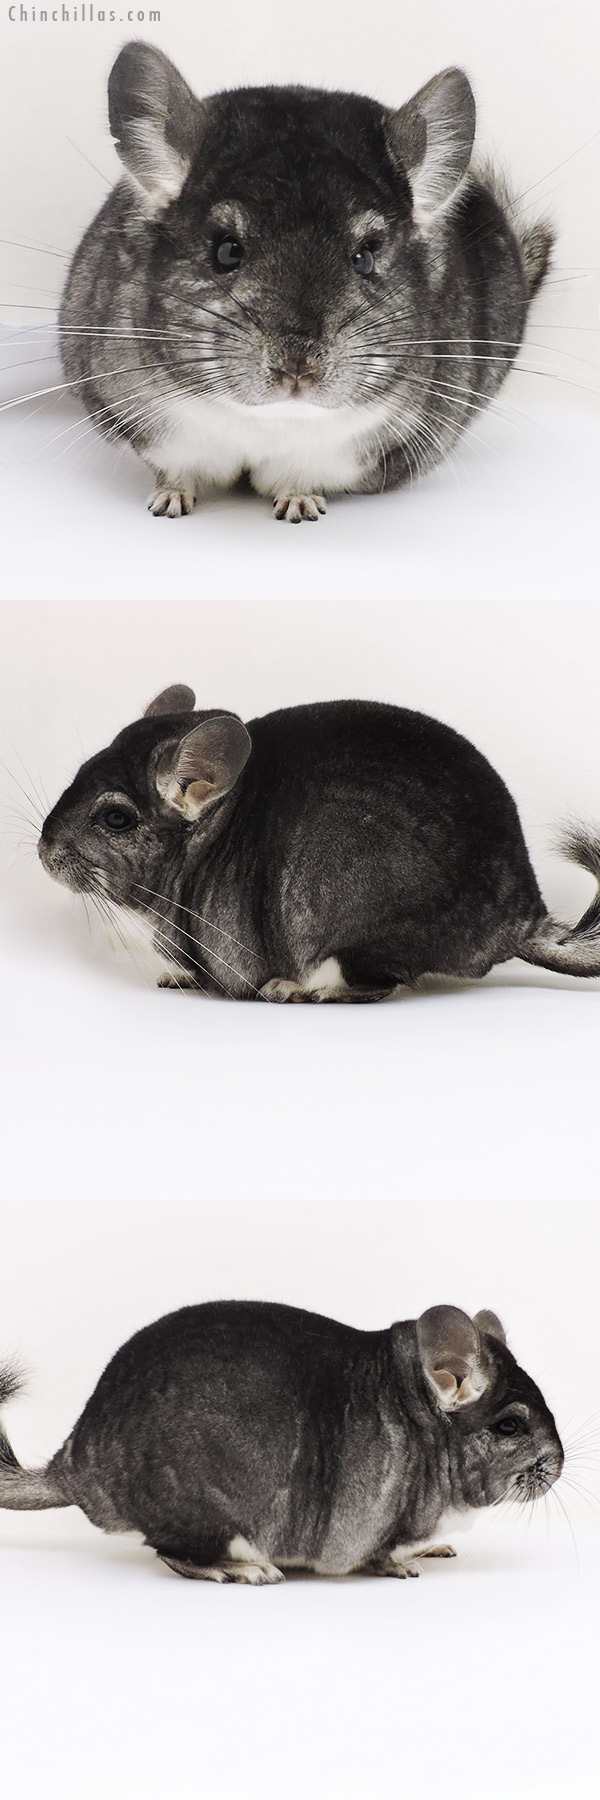 Chinchilla or related item offered for sale or export on Chinchillas.com - 17133 Blocky Herd Improvement Quality Standard Male Chinchilla